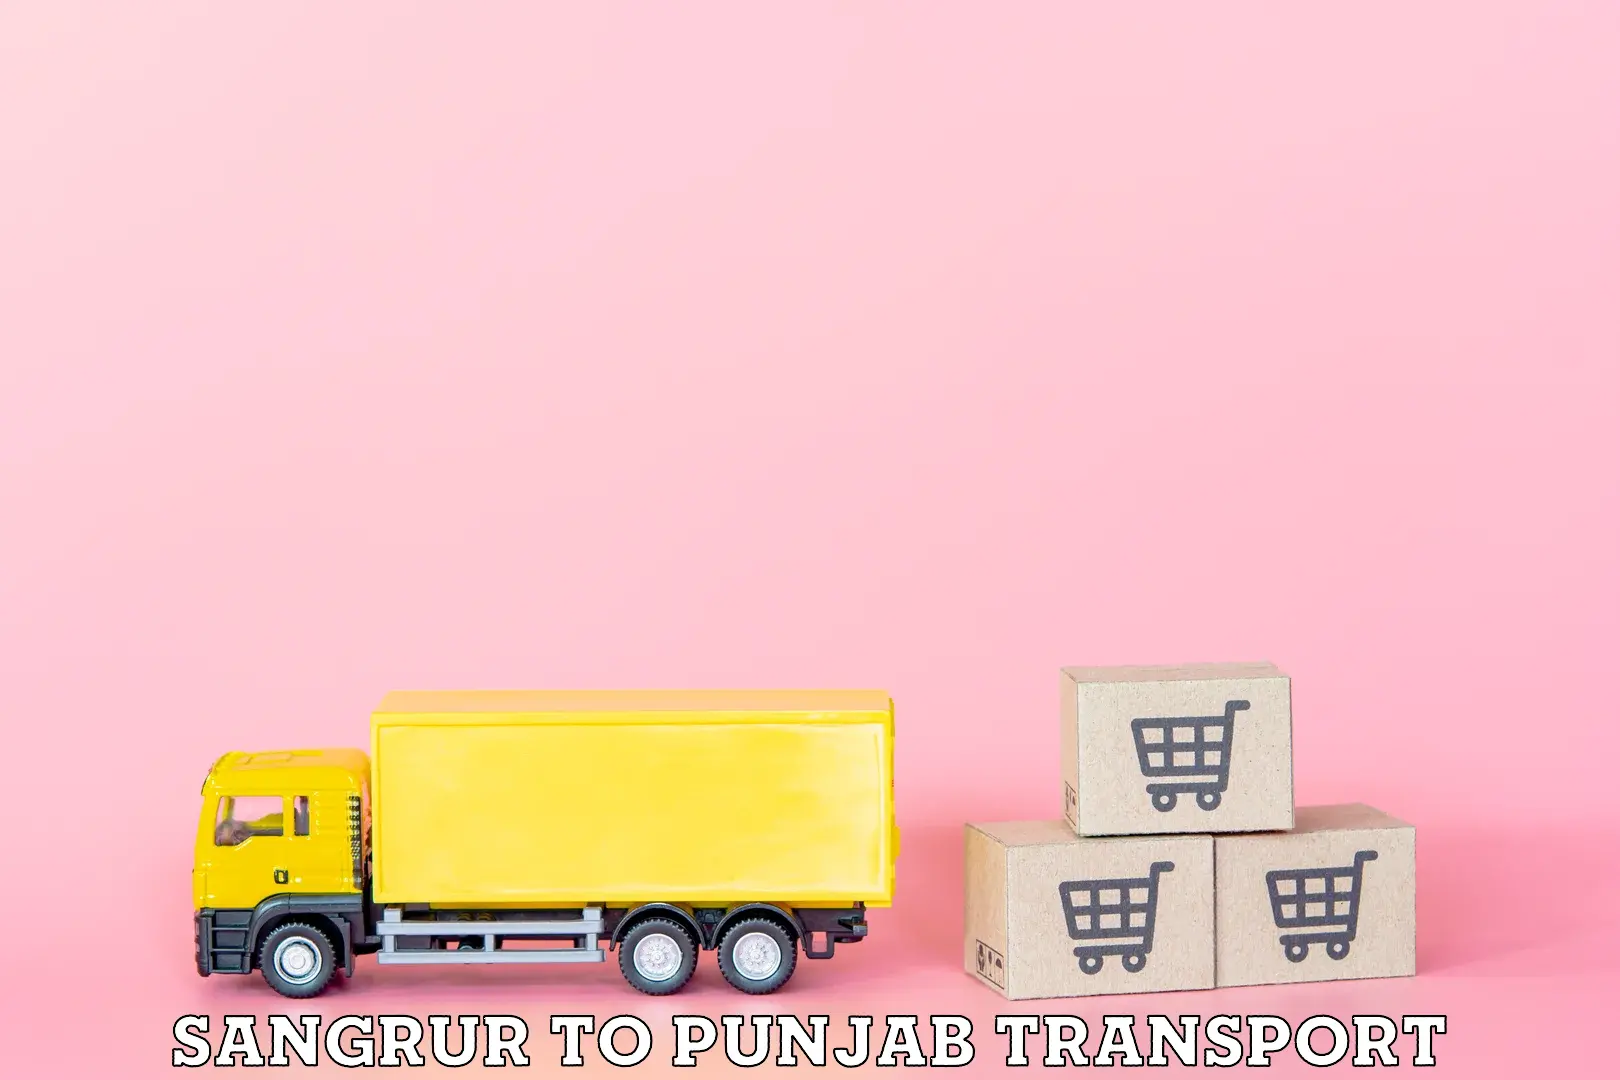 Nationwide transport services Sangrur to Ludhiana